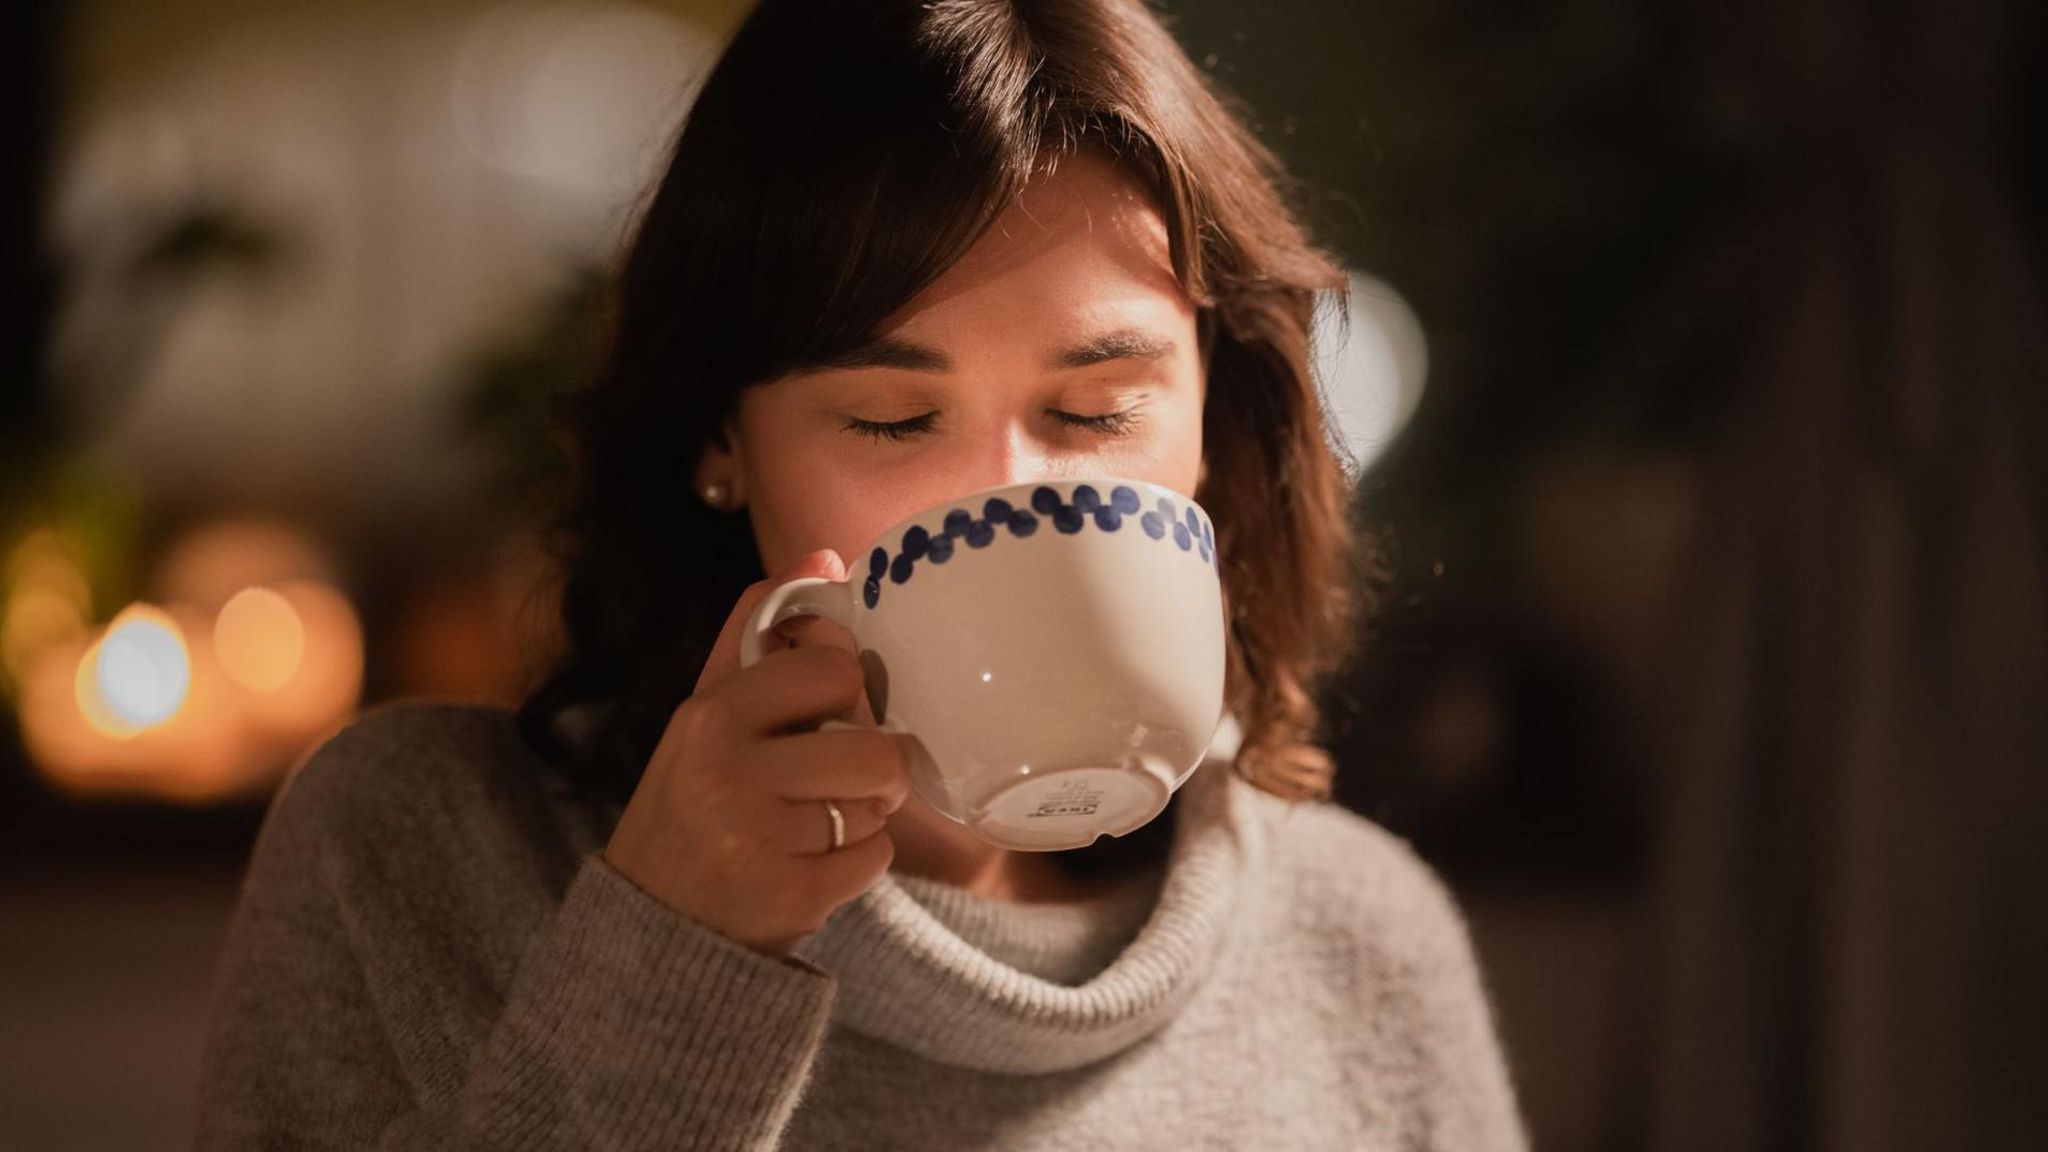 Young woman enjoying a warm drink from an oversized mug providing as much comfort as her natty jumper.